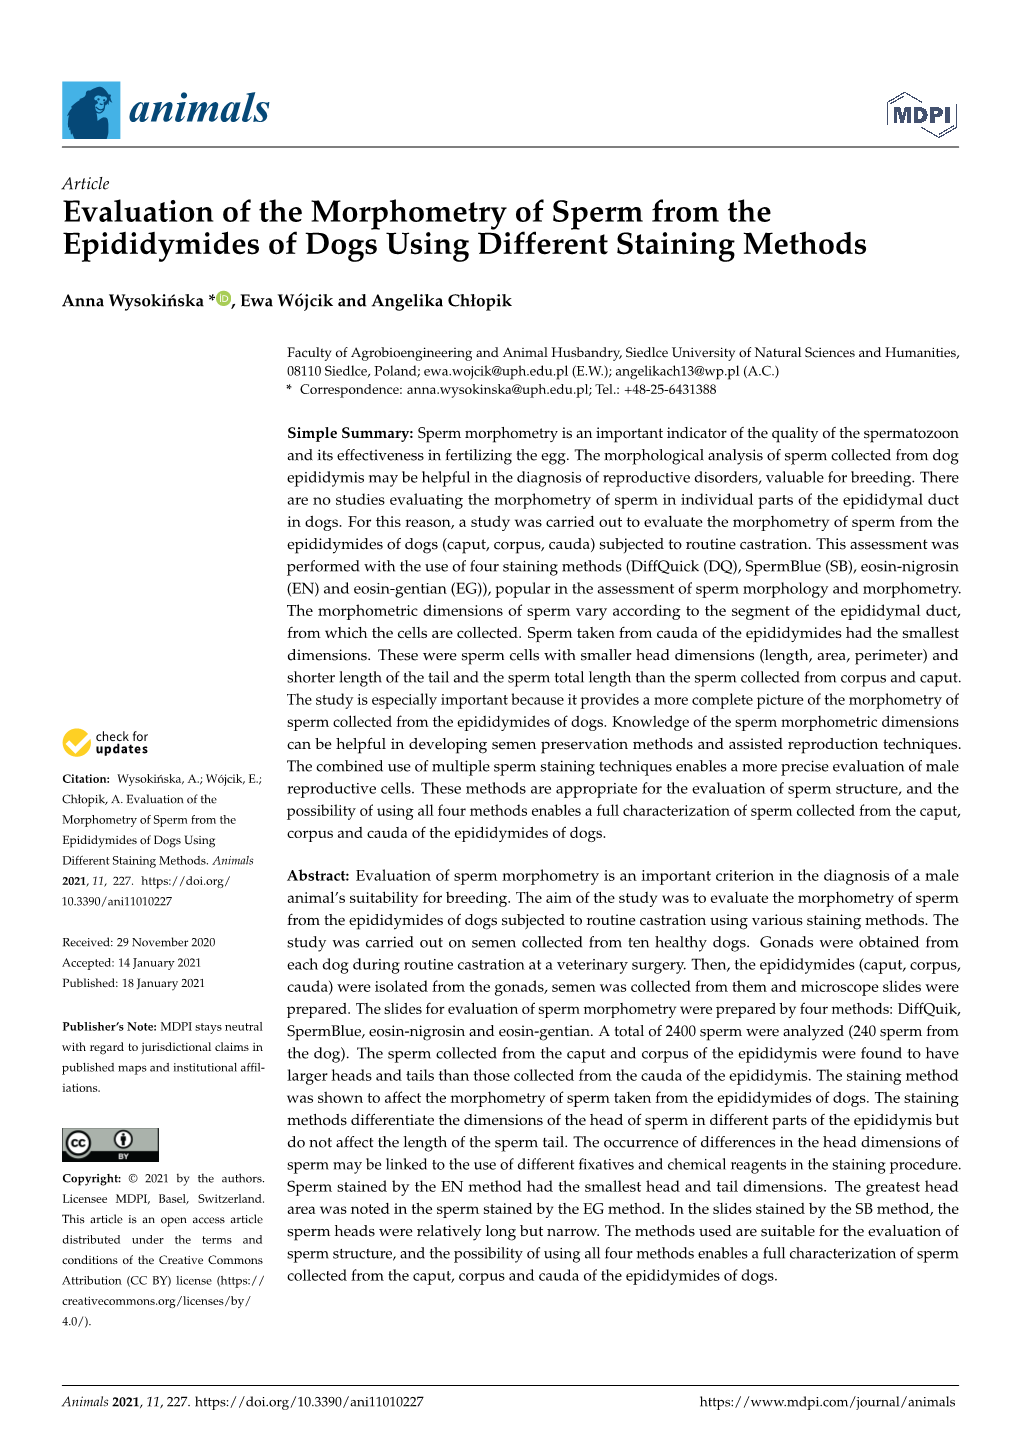 Evaluation of the Morphometry of Sperm from the Epididymides of Dogs Using Different Staining Methods